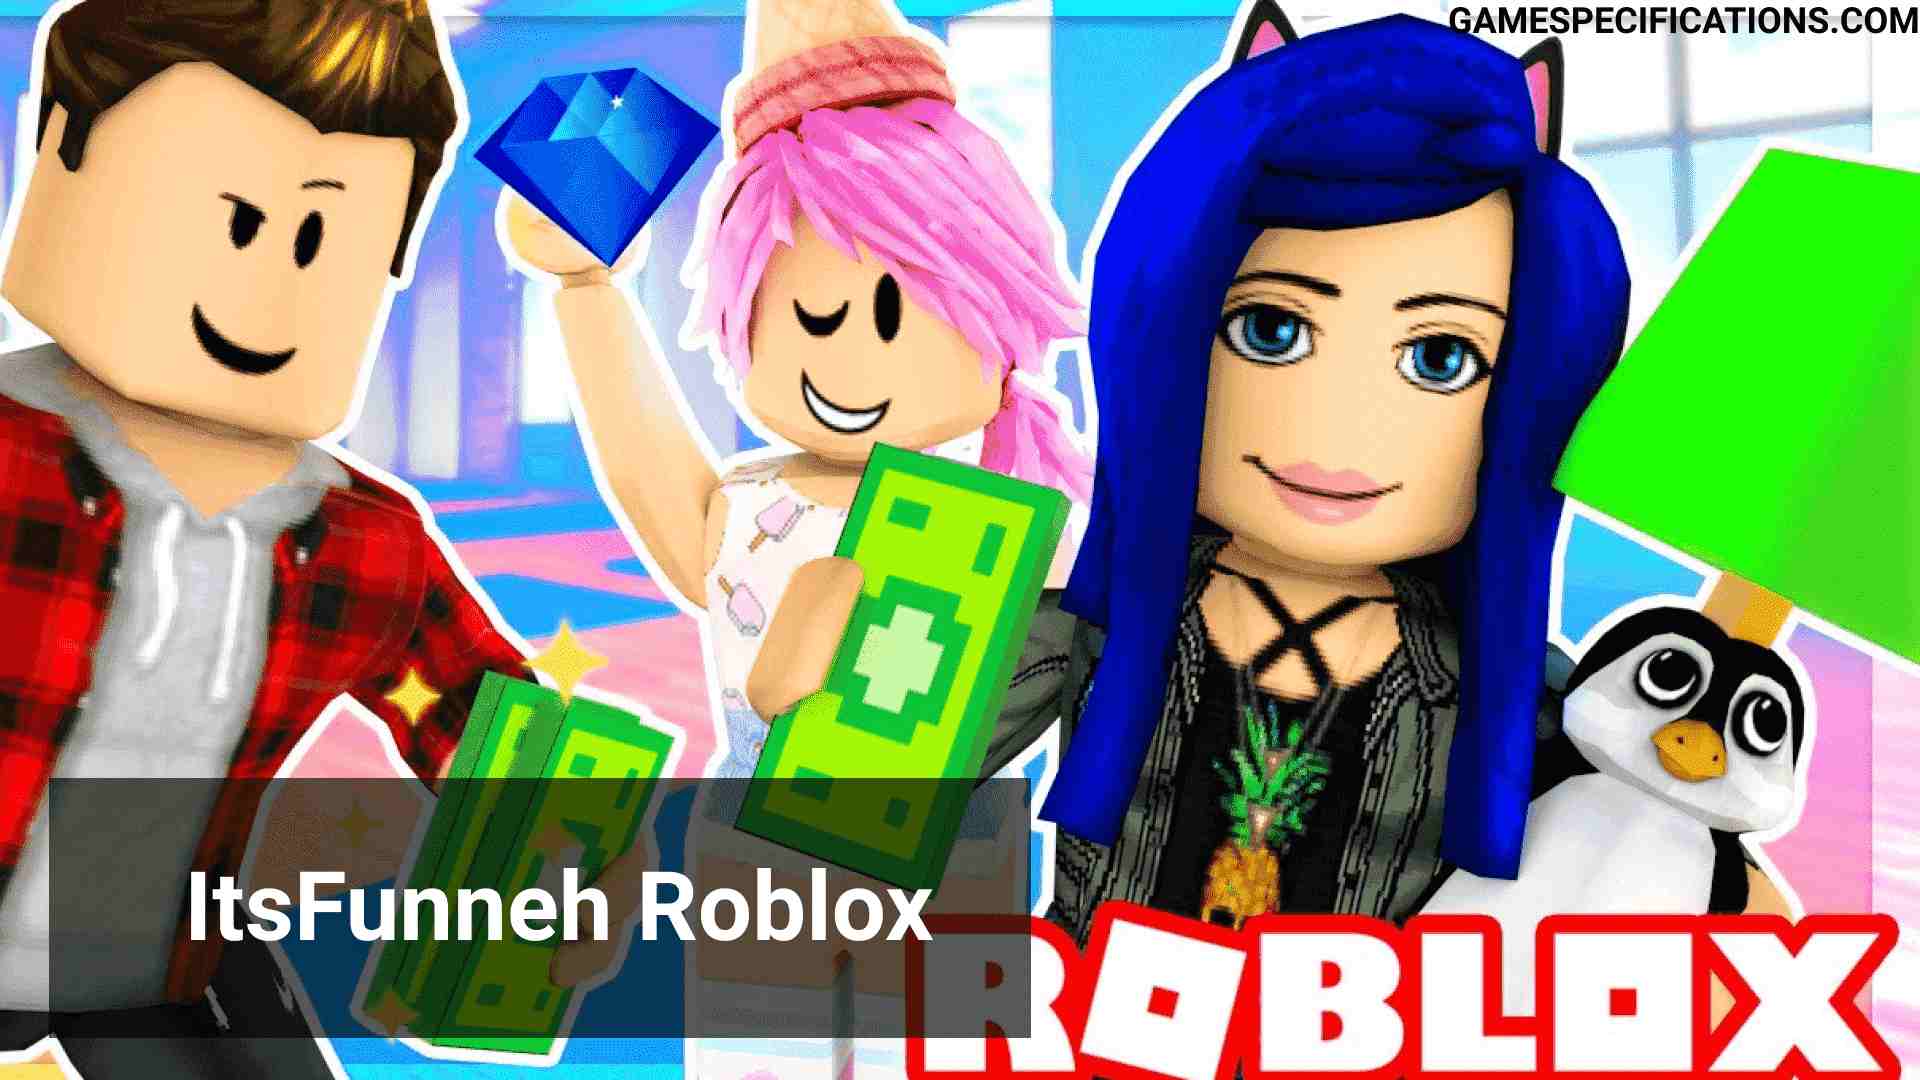 Itsfunneh Roblox Legendary Top Videos Game Specifications - youtube itsfunneh roblox